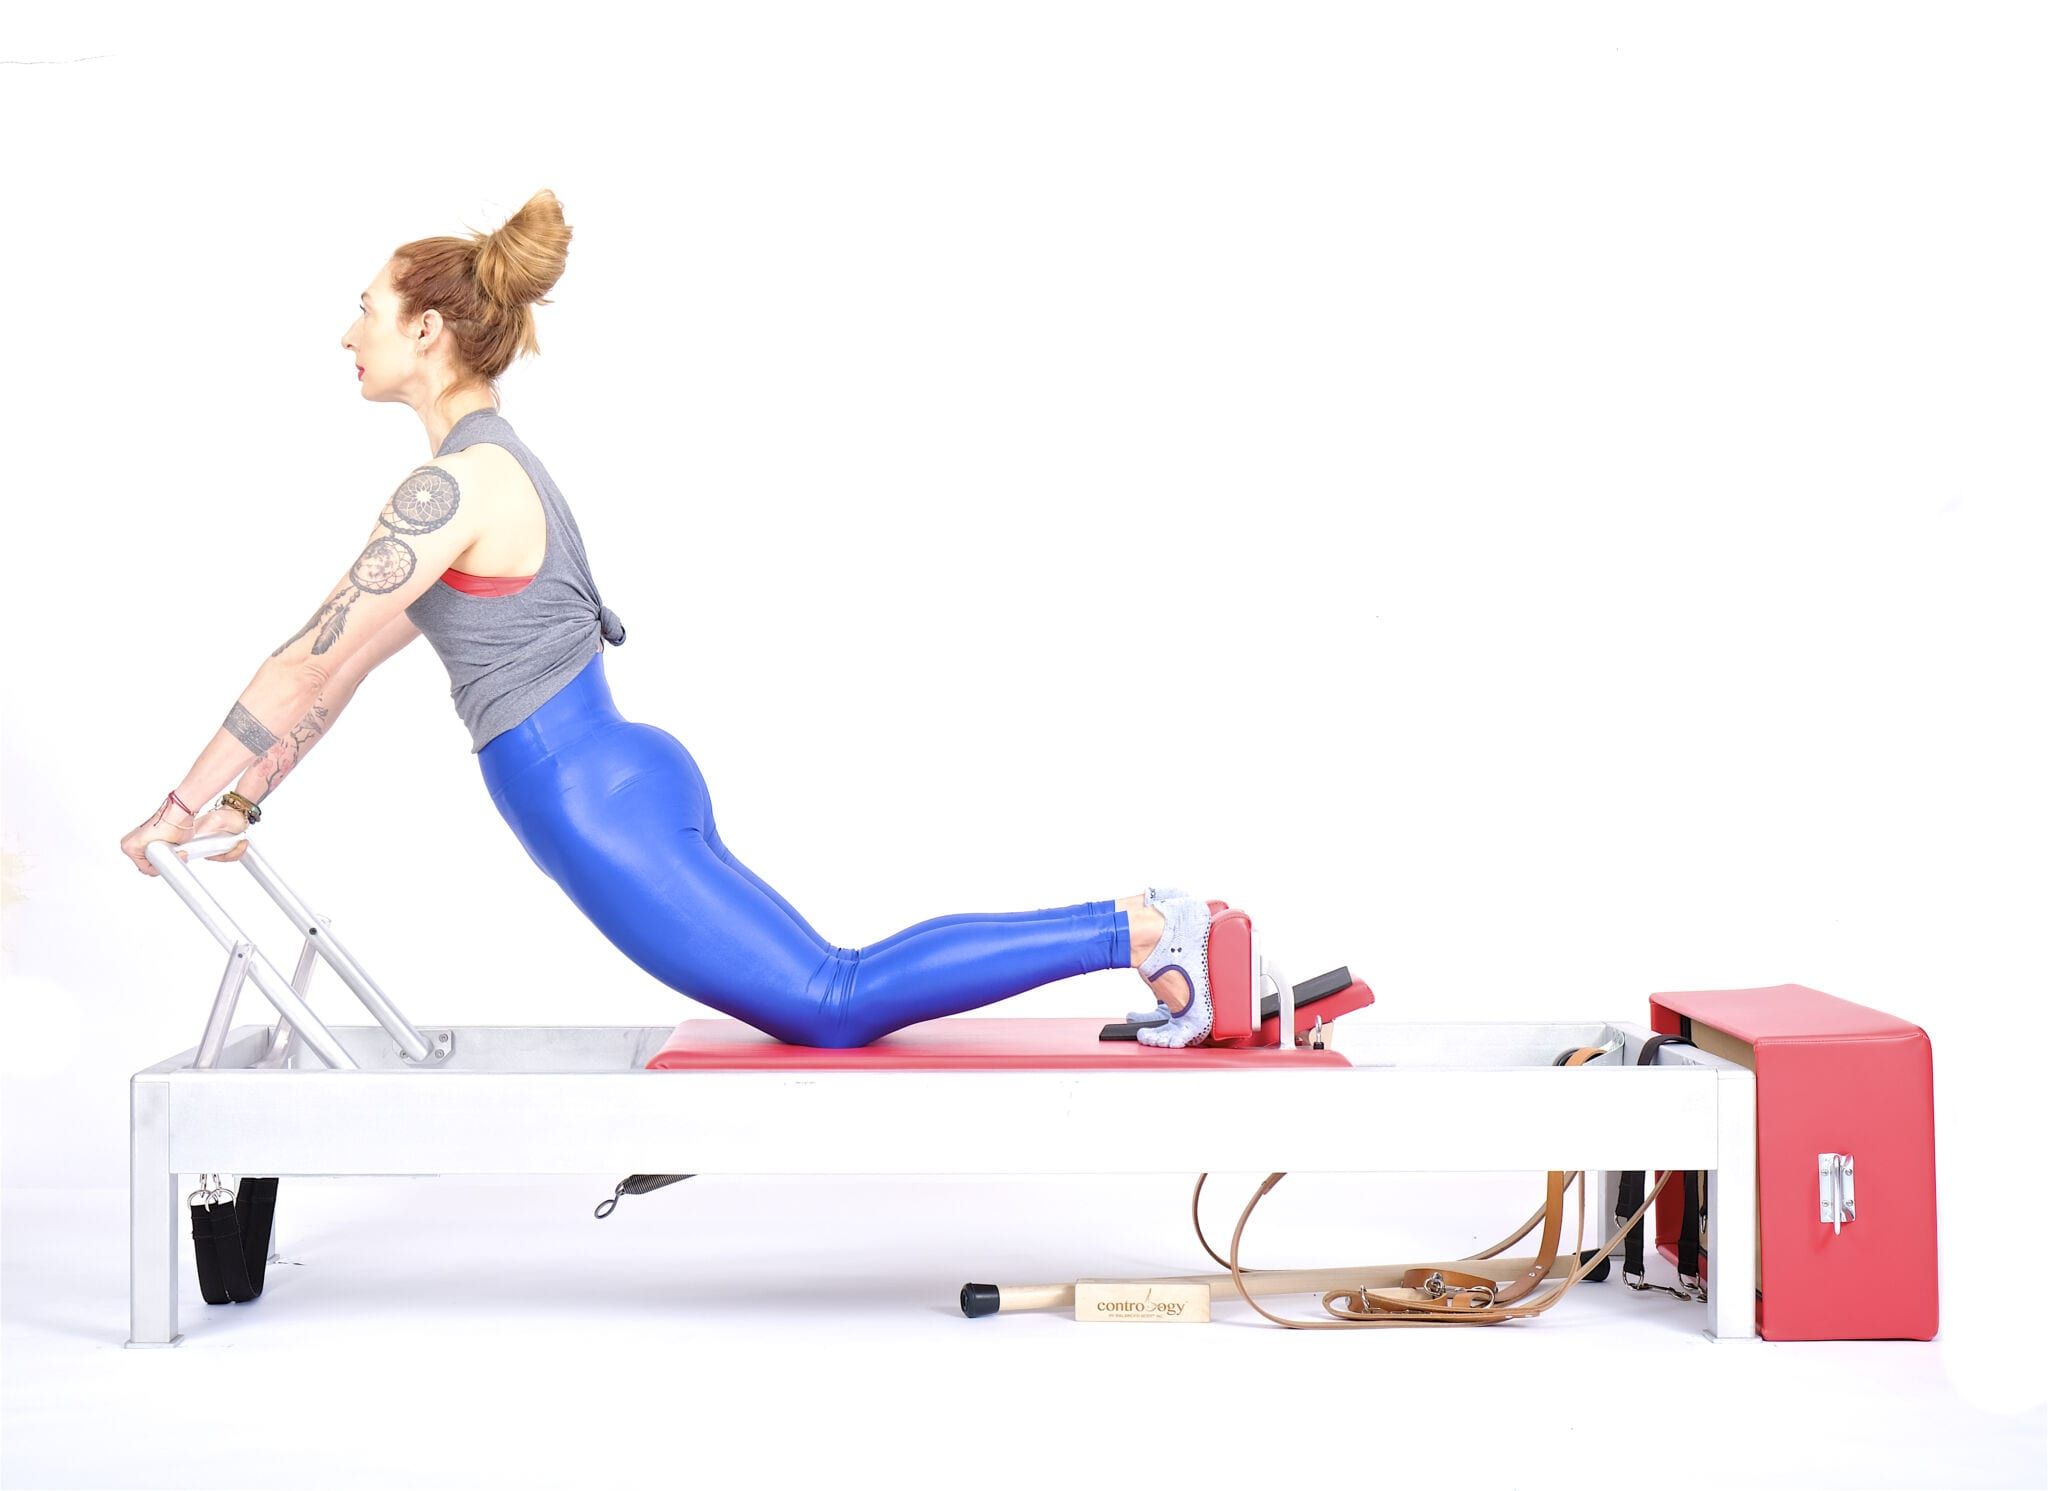 Down Stretch on the Reformer